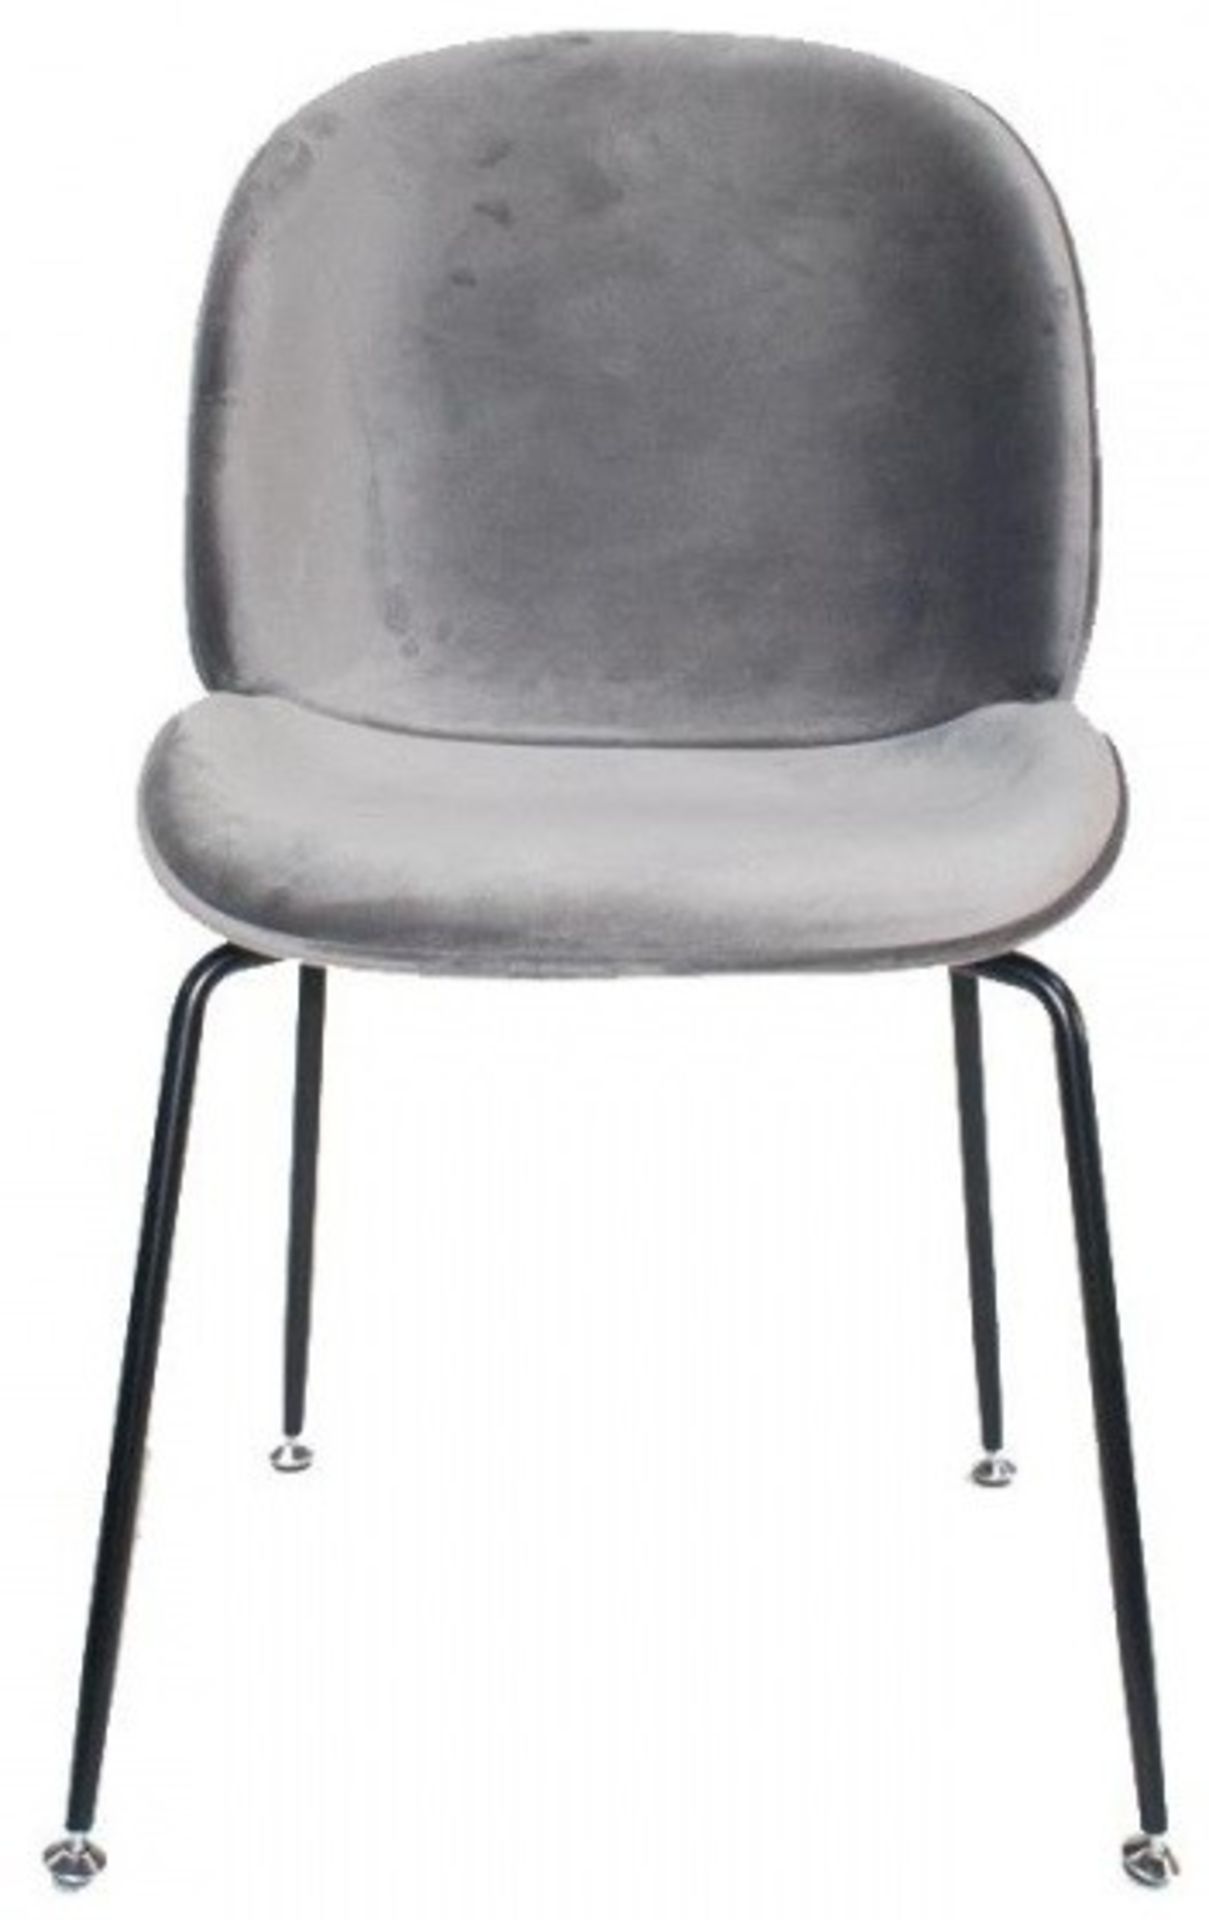 4 x GRACE Upholstered Contemporary Dining Chairs In Grey Velvet - Dimensions: W48 x D50 x H85 cm - - Image 2 of 3